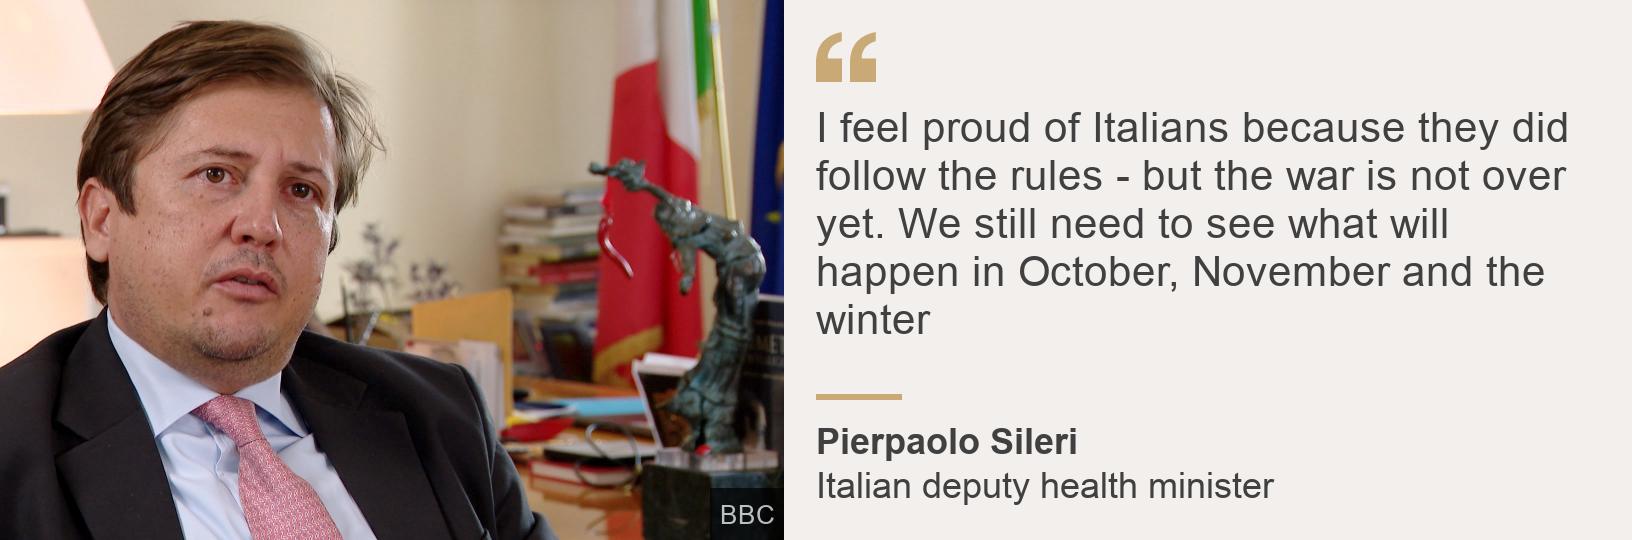 &quot;I feel proud of Italians because they did follow the rules - but the war is not over yet. We still need to see what will happen in October, November and the winter&quot;, Source: Pierpaolo Sileri, Source description: Italian deputy health minister, Image: Pierpaolo Sileri